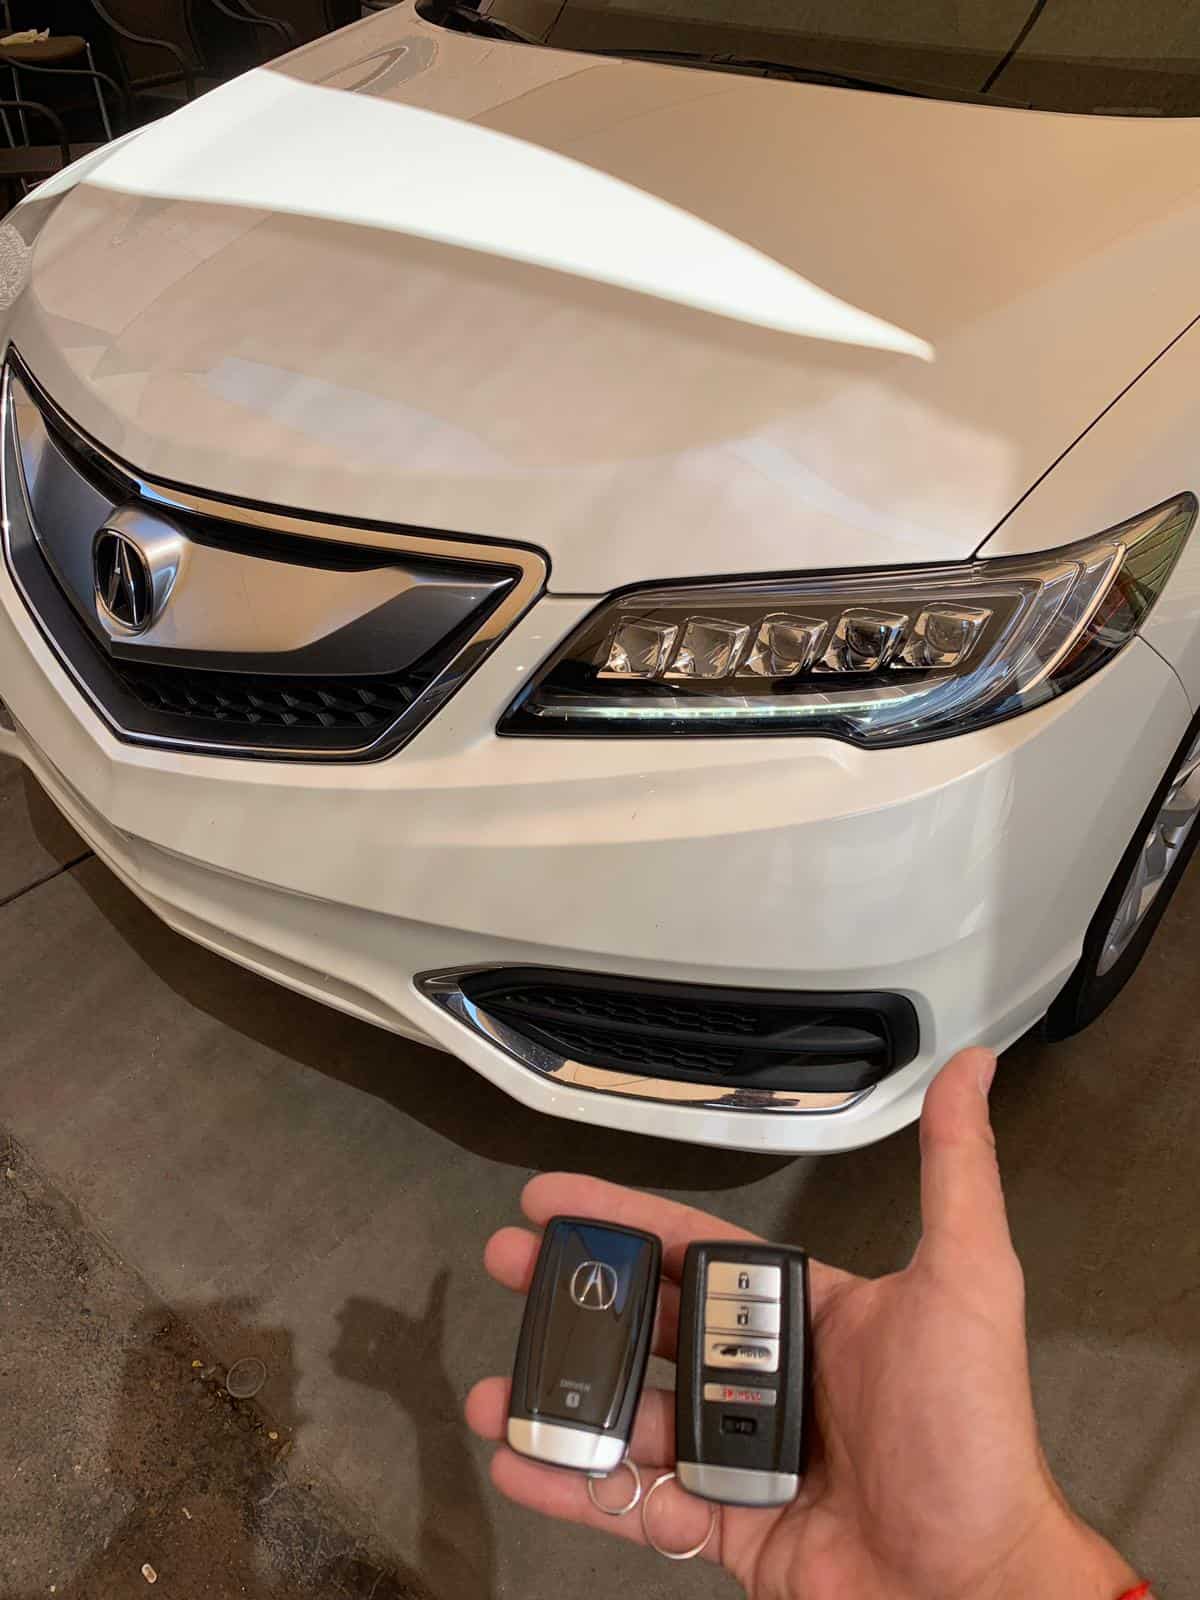 Acura key fob replacement